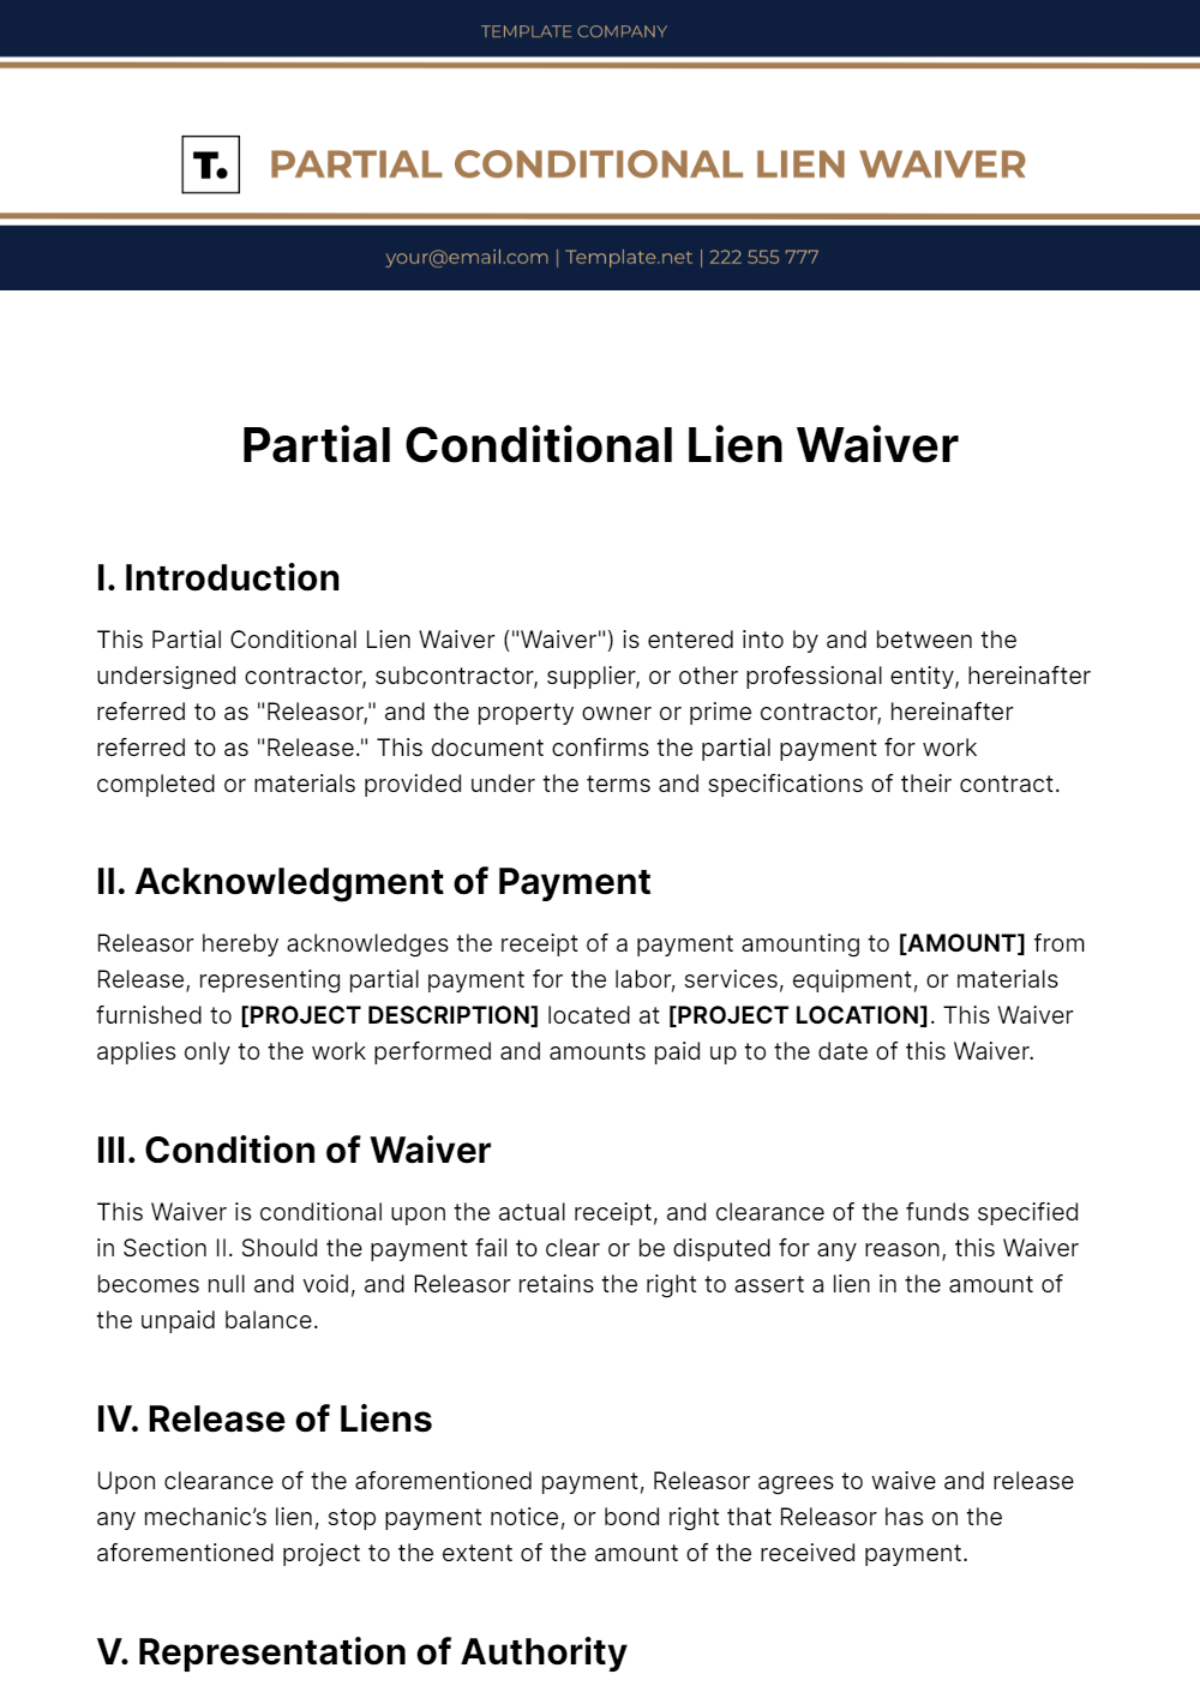 Free Partial Conditional Lien Waiver Template